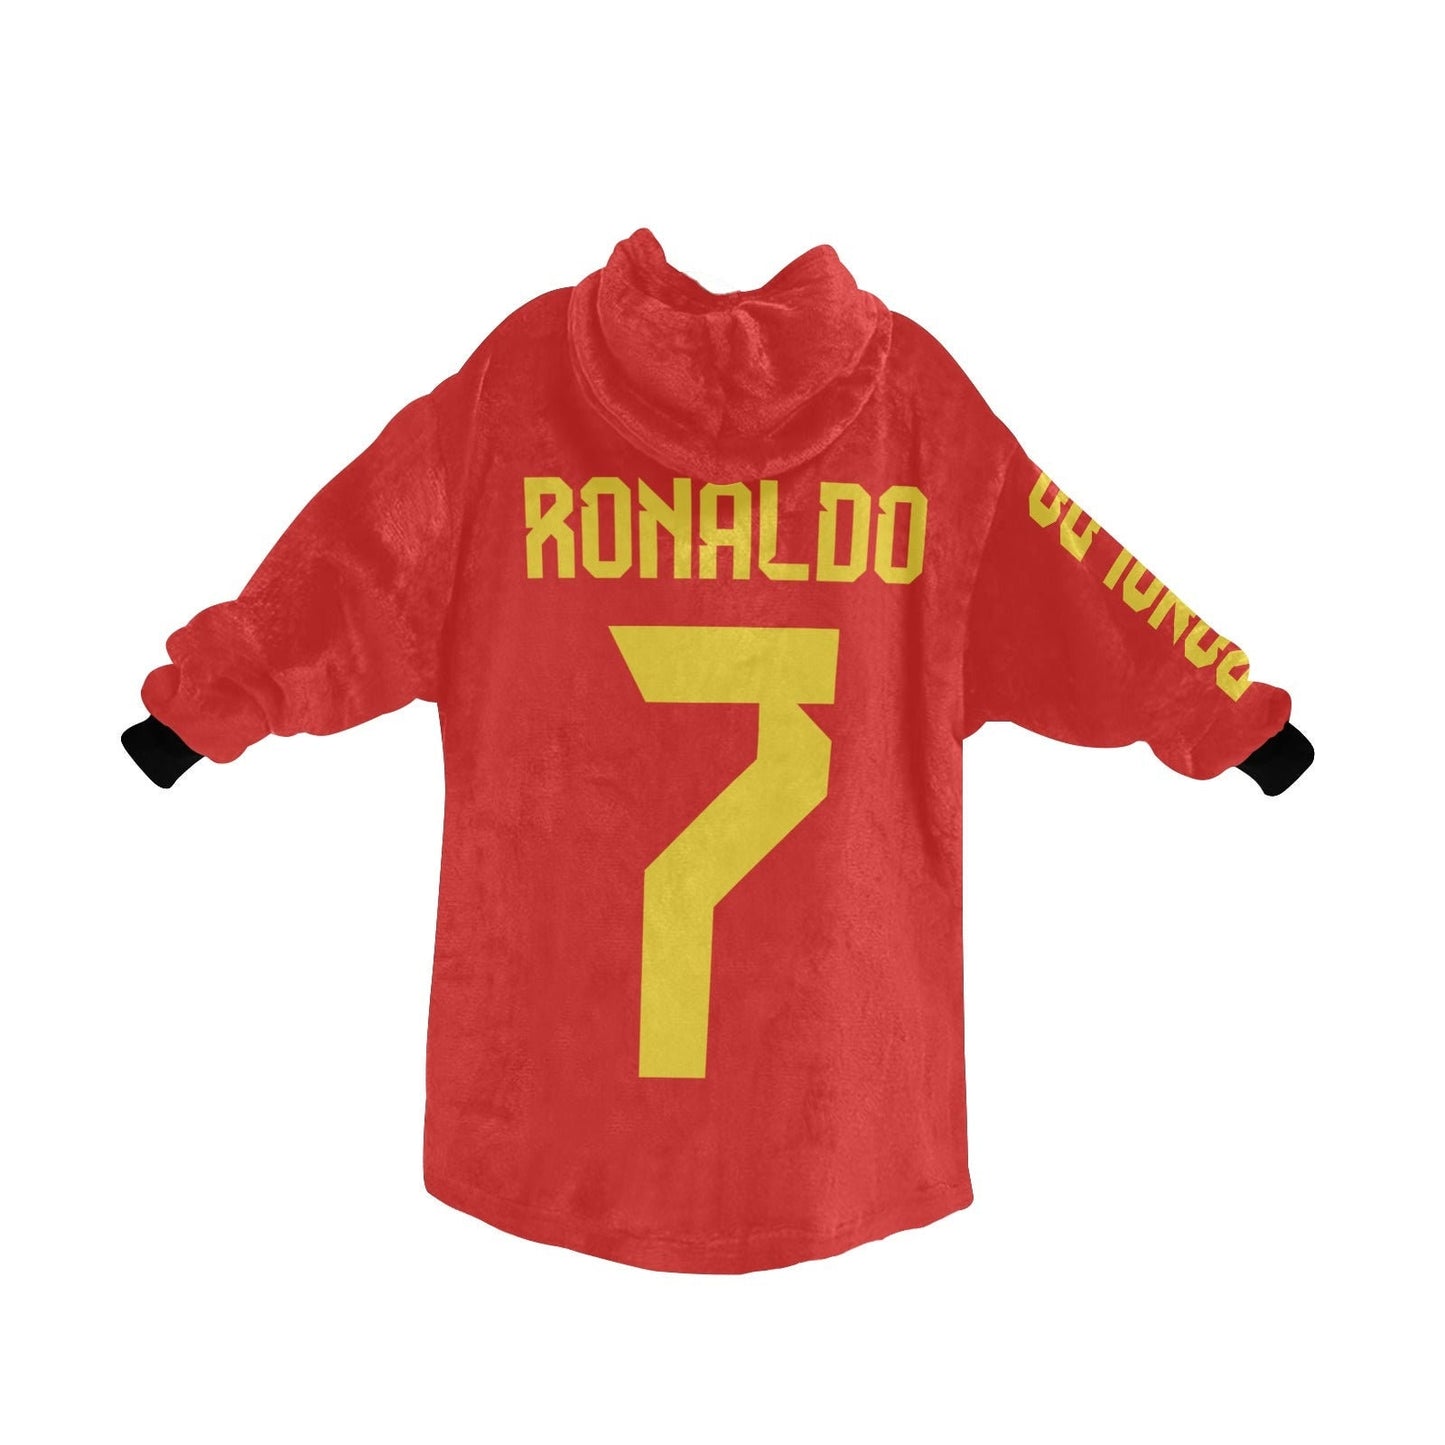 CR7 Kids Hooded Blanket  • Cristiano Ronaldo Gift for Kids and Adults • Portugal World Cup Soccer Blanket